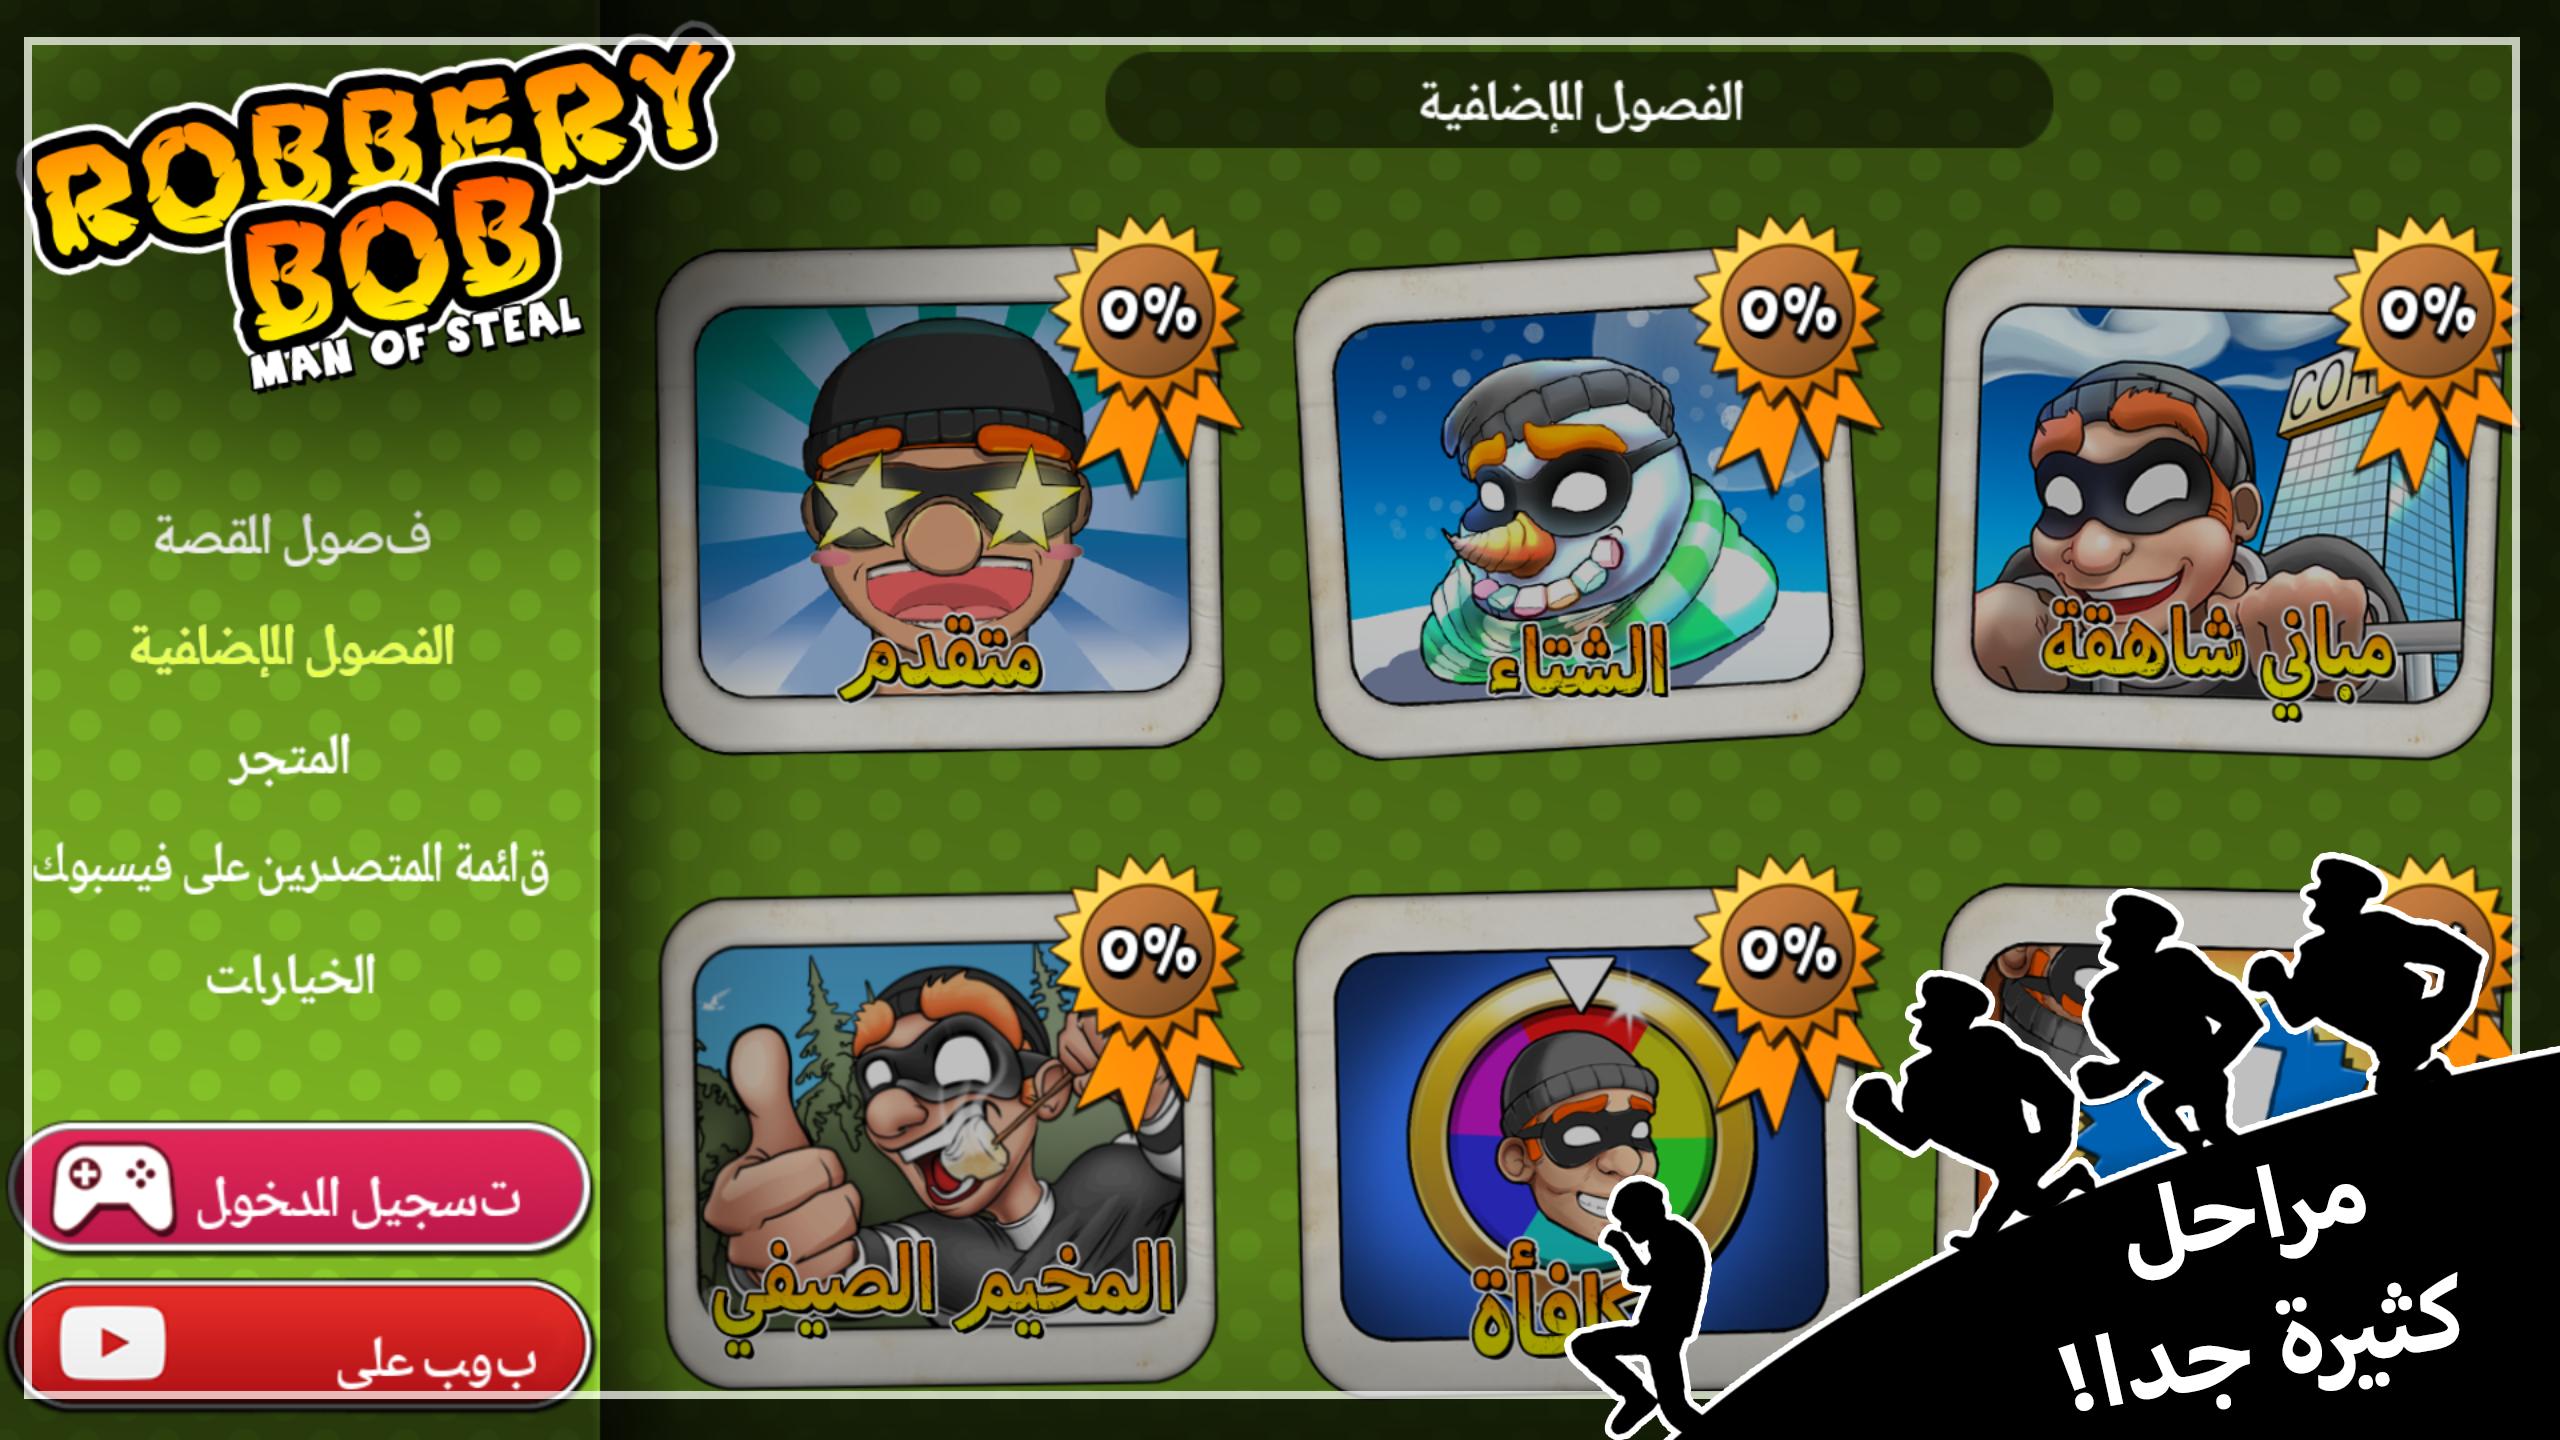 Robbery Bob for Android - APK Download